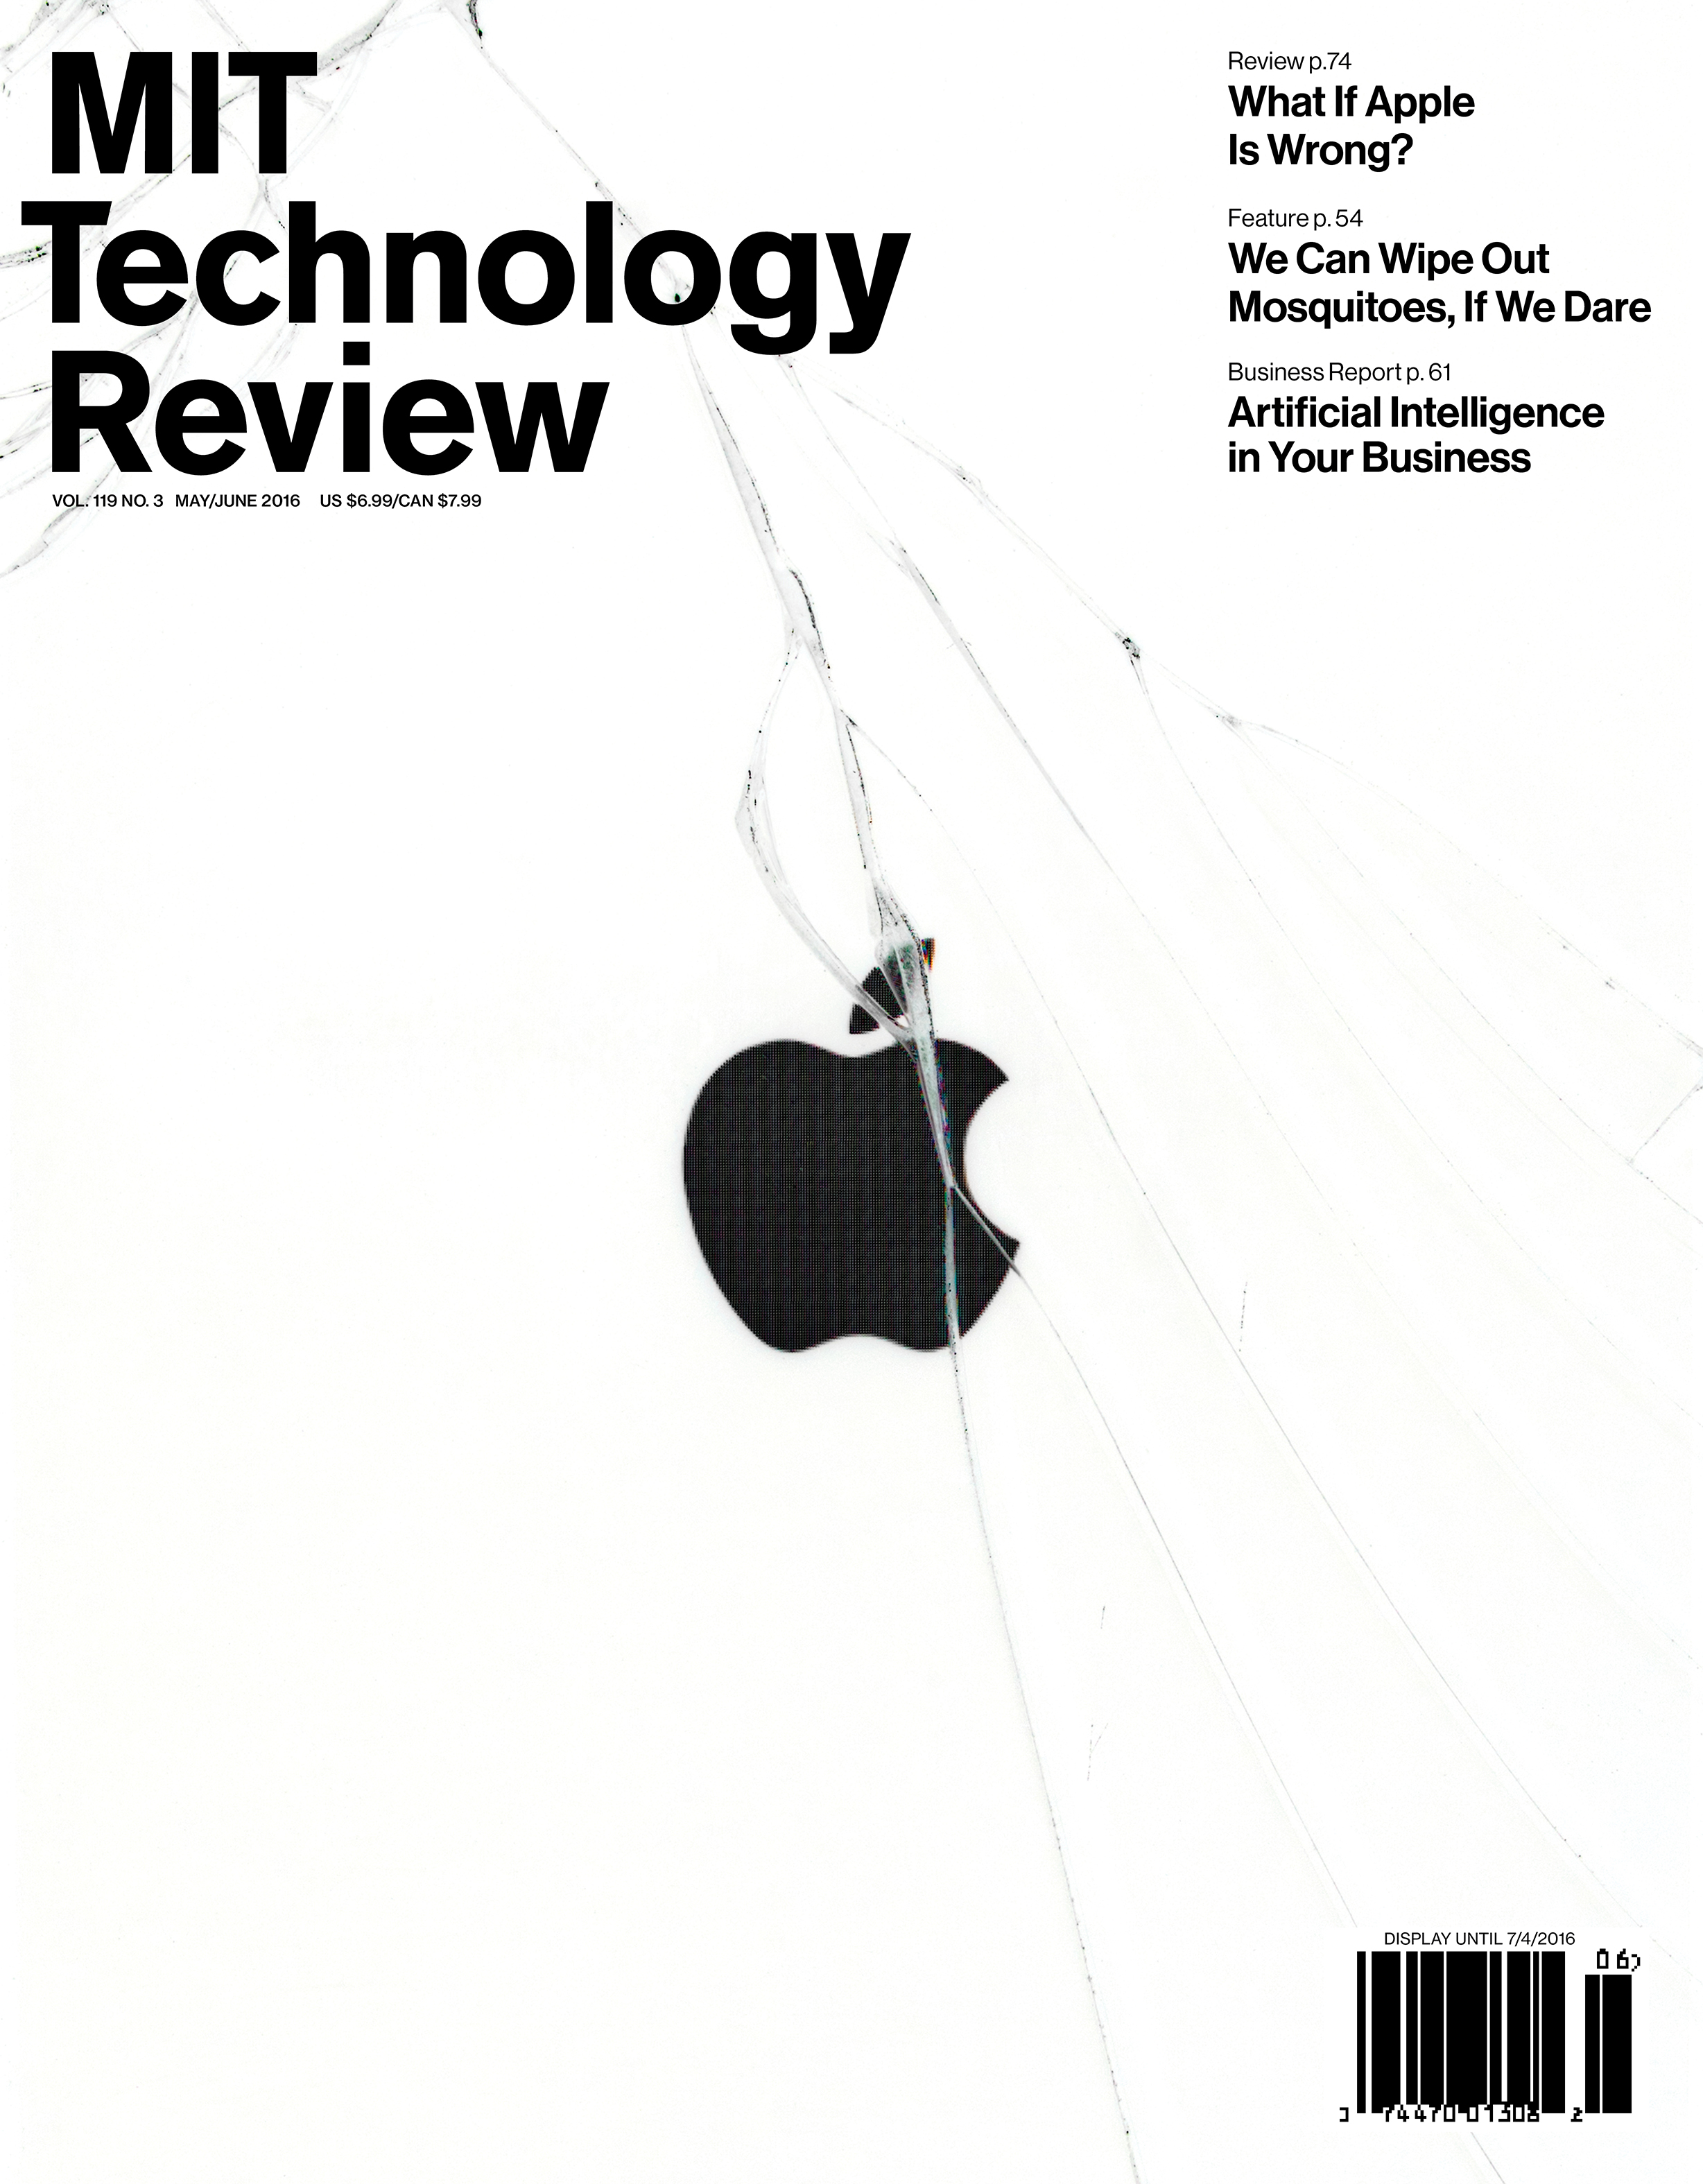 MIT Technology Review  "What If Apple Is Wrong?," May/June